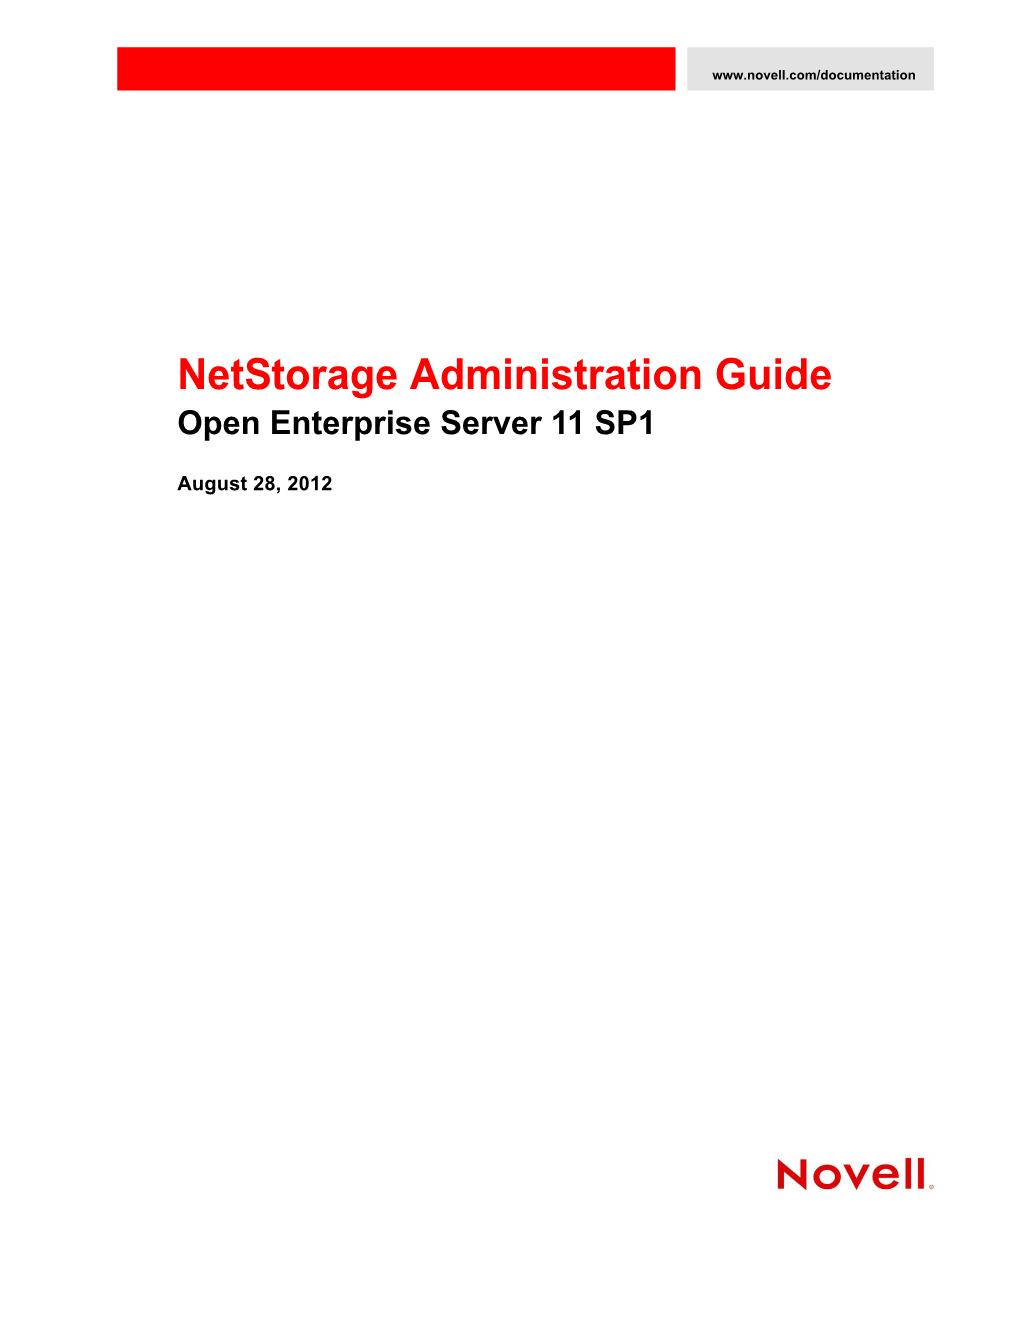 OES 11 SP1: Netstorage Administration Guide for Linux About This Guide